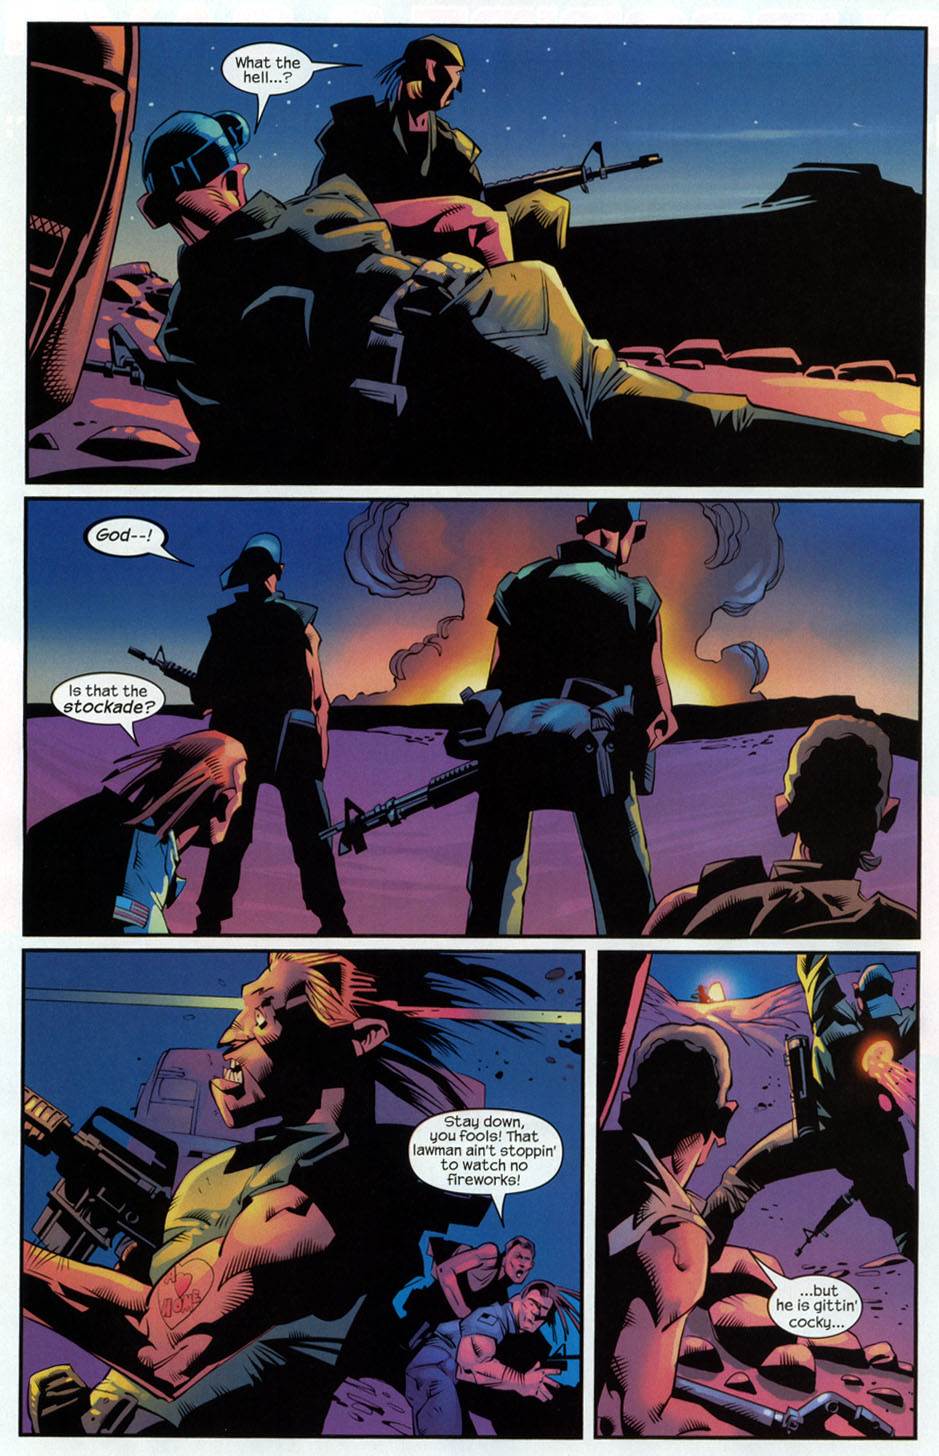 The Punisher (2001) issue 30 - Streets of Laredo #03 - Page 19